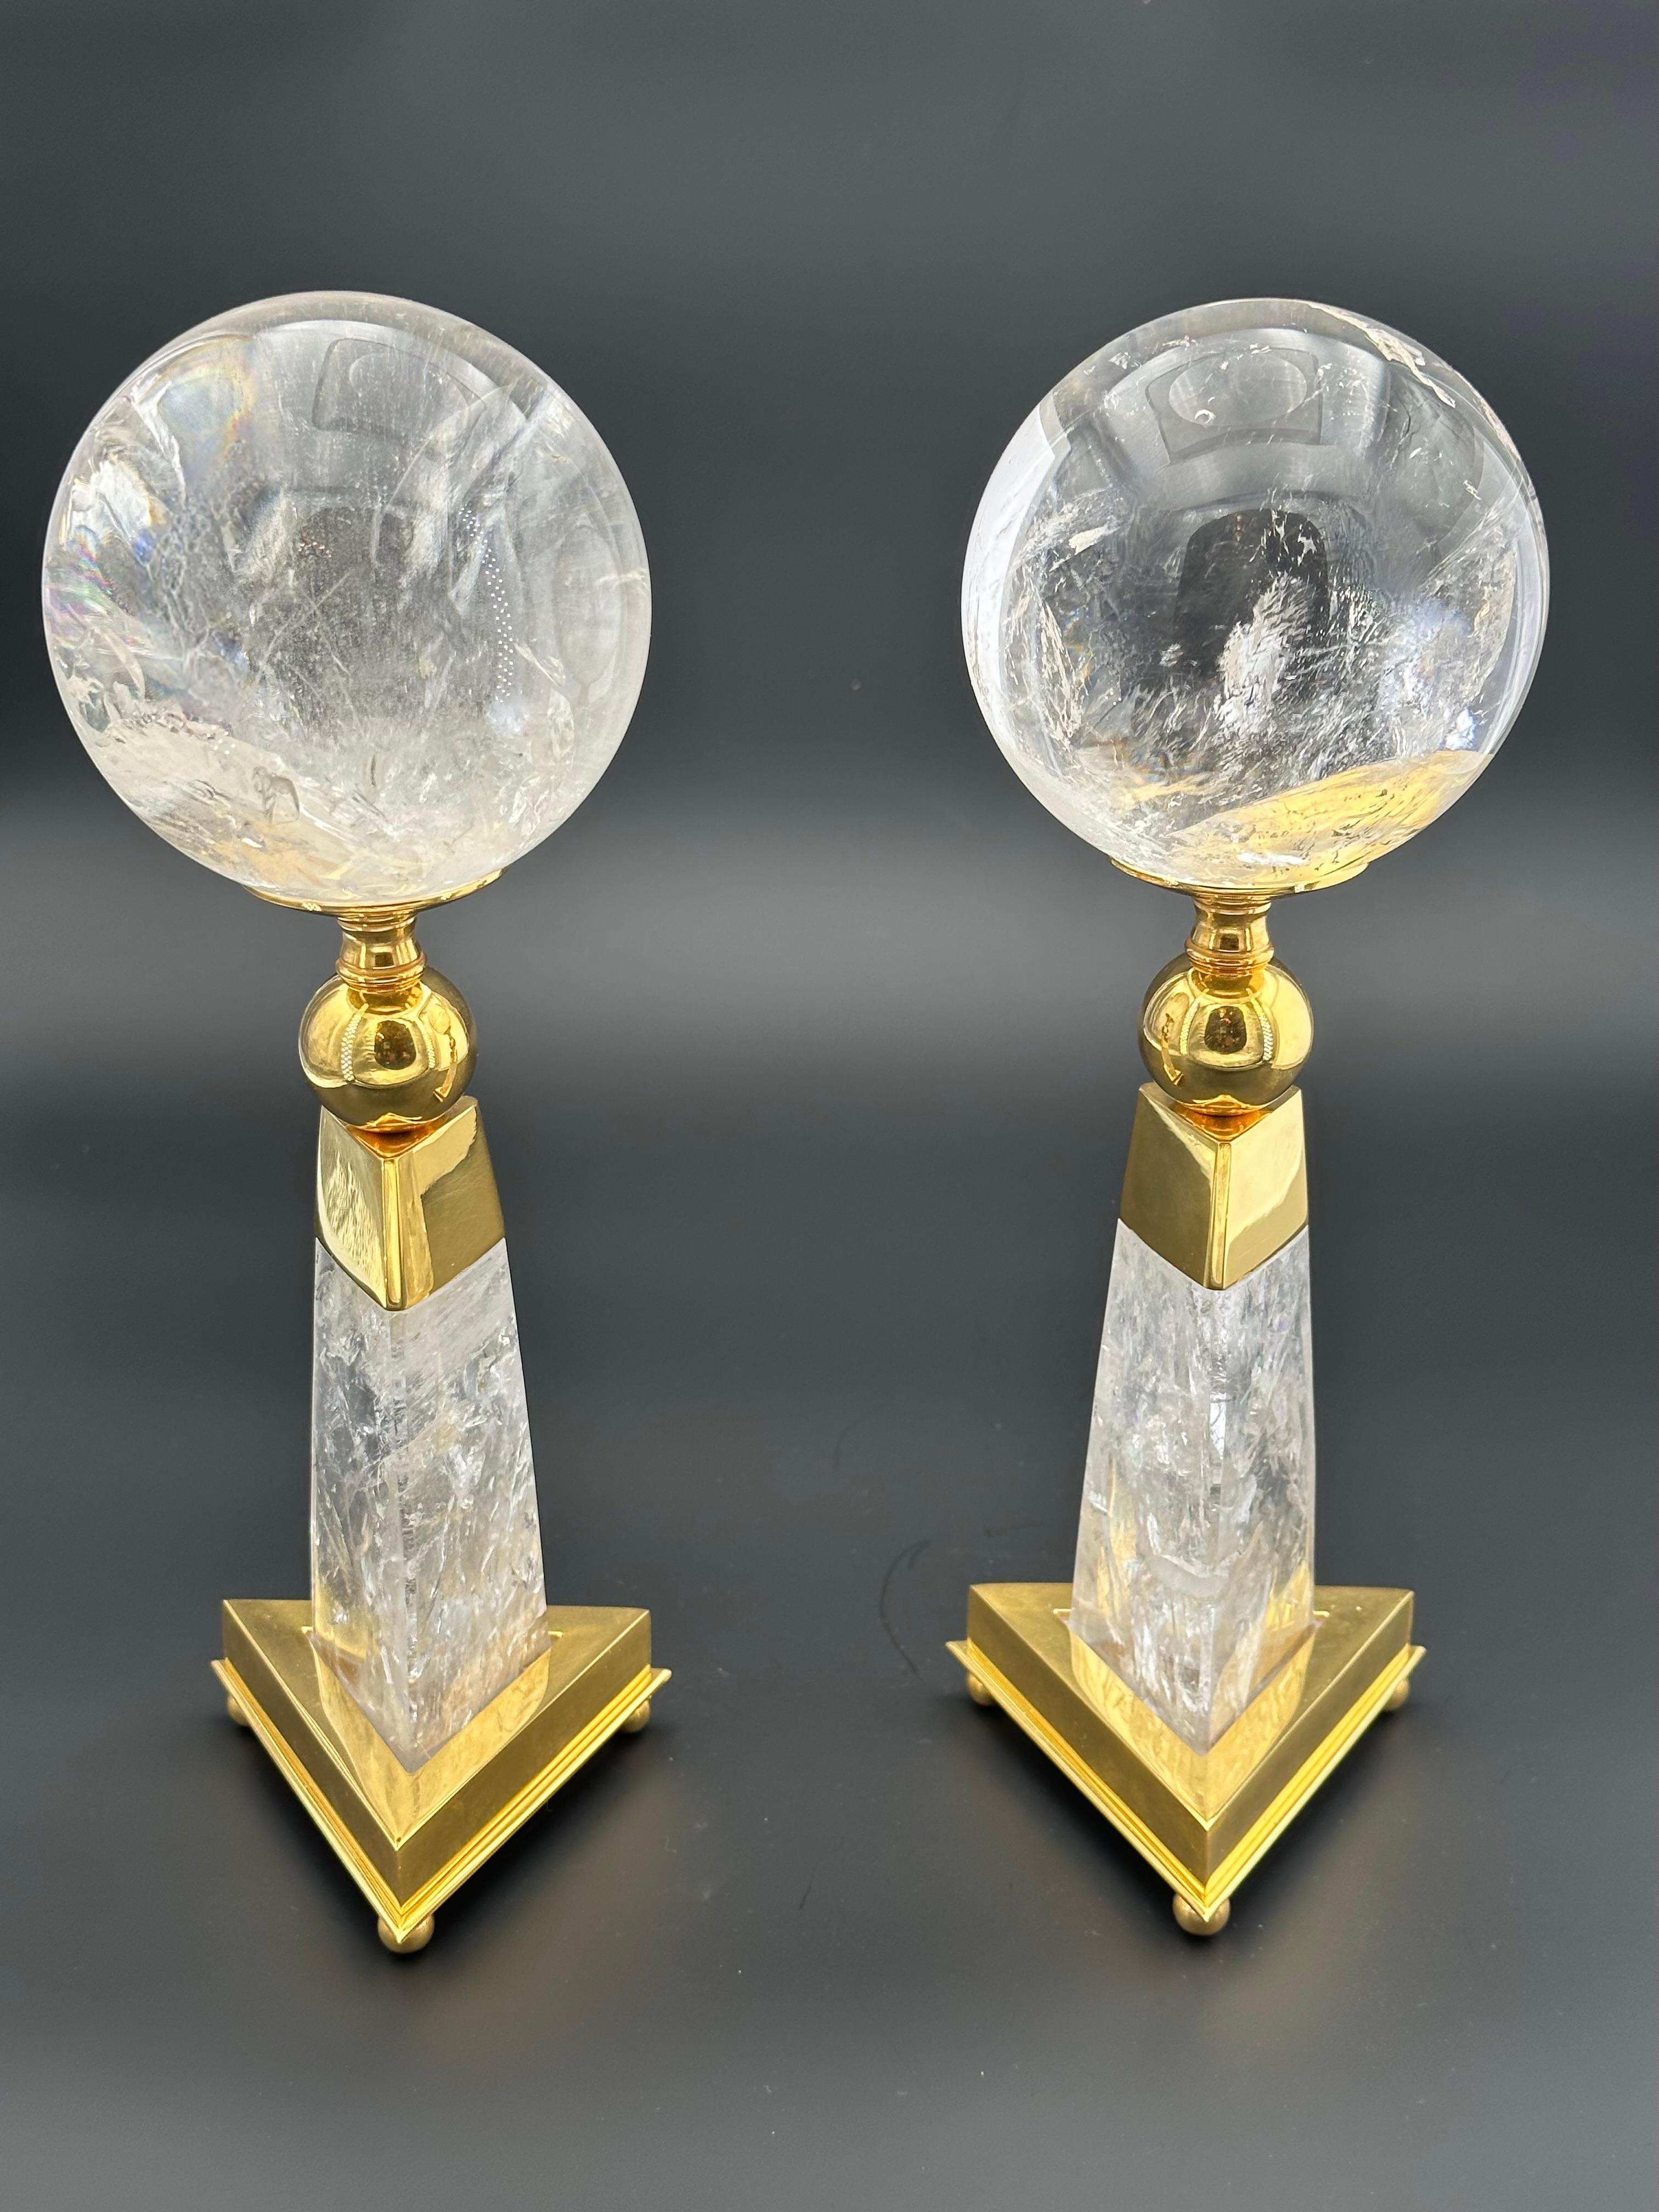 Amazeing pair of rock crystal spheres with their rock crystal and 24 K gold plated holder.
Made in FRANCE .